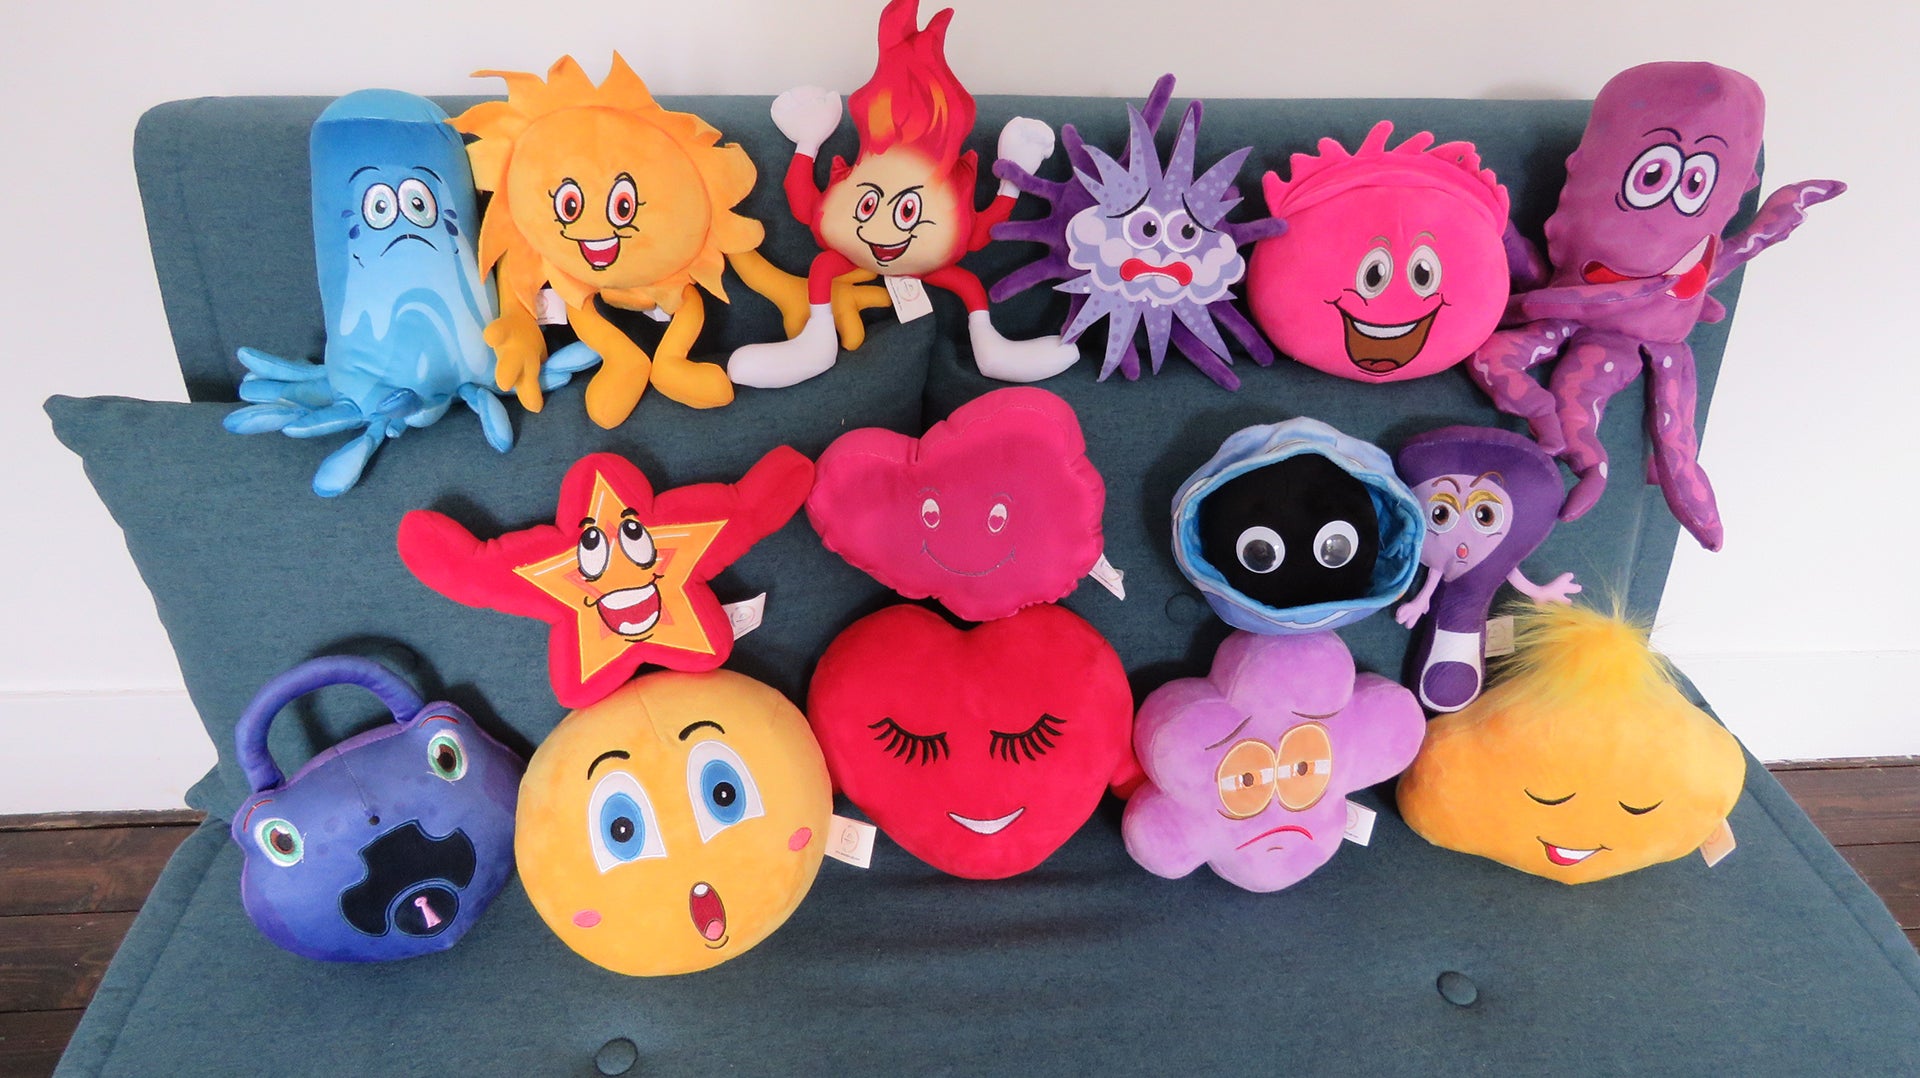 The Mood Munchers Toys